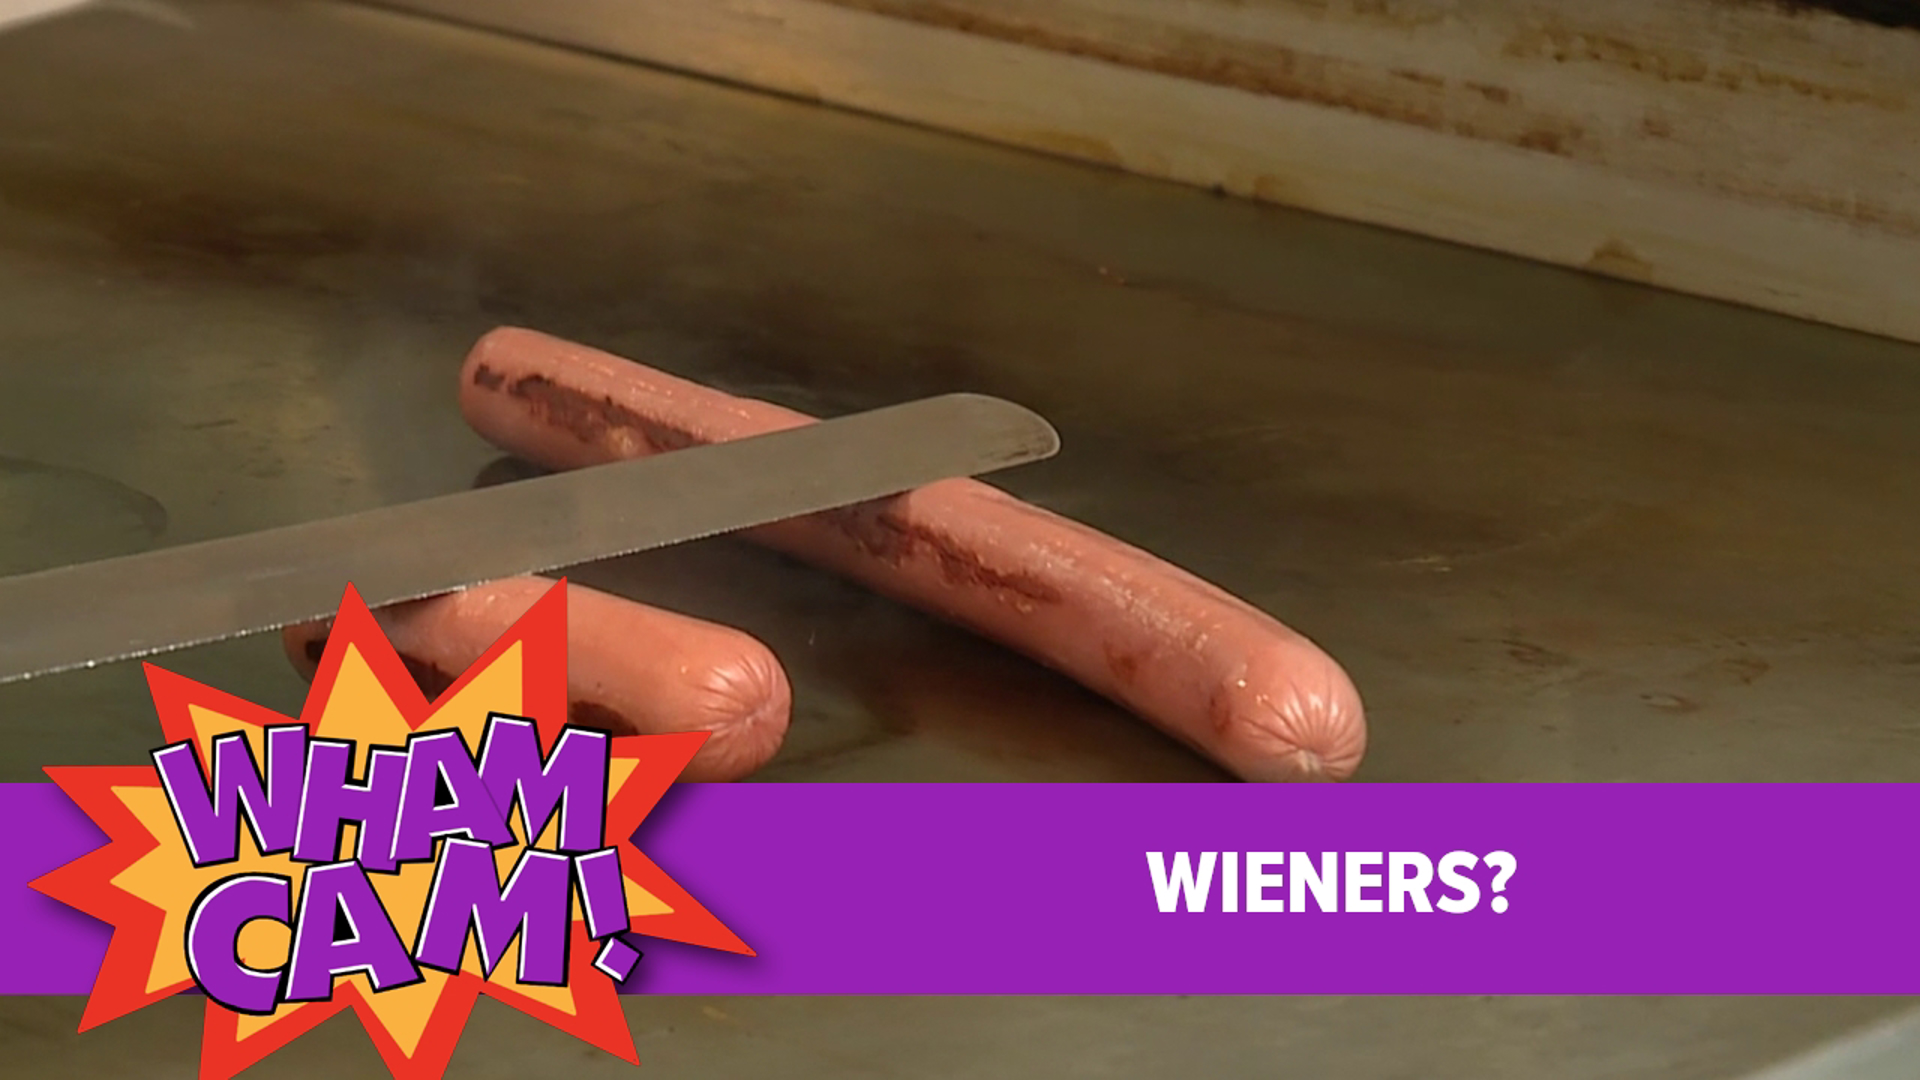 Grilling season is here, and Joe's thinking about hot dogs. He wants to know why hot dogs are also called  in this week's Wham Cam.